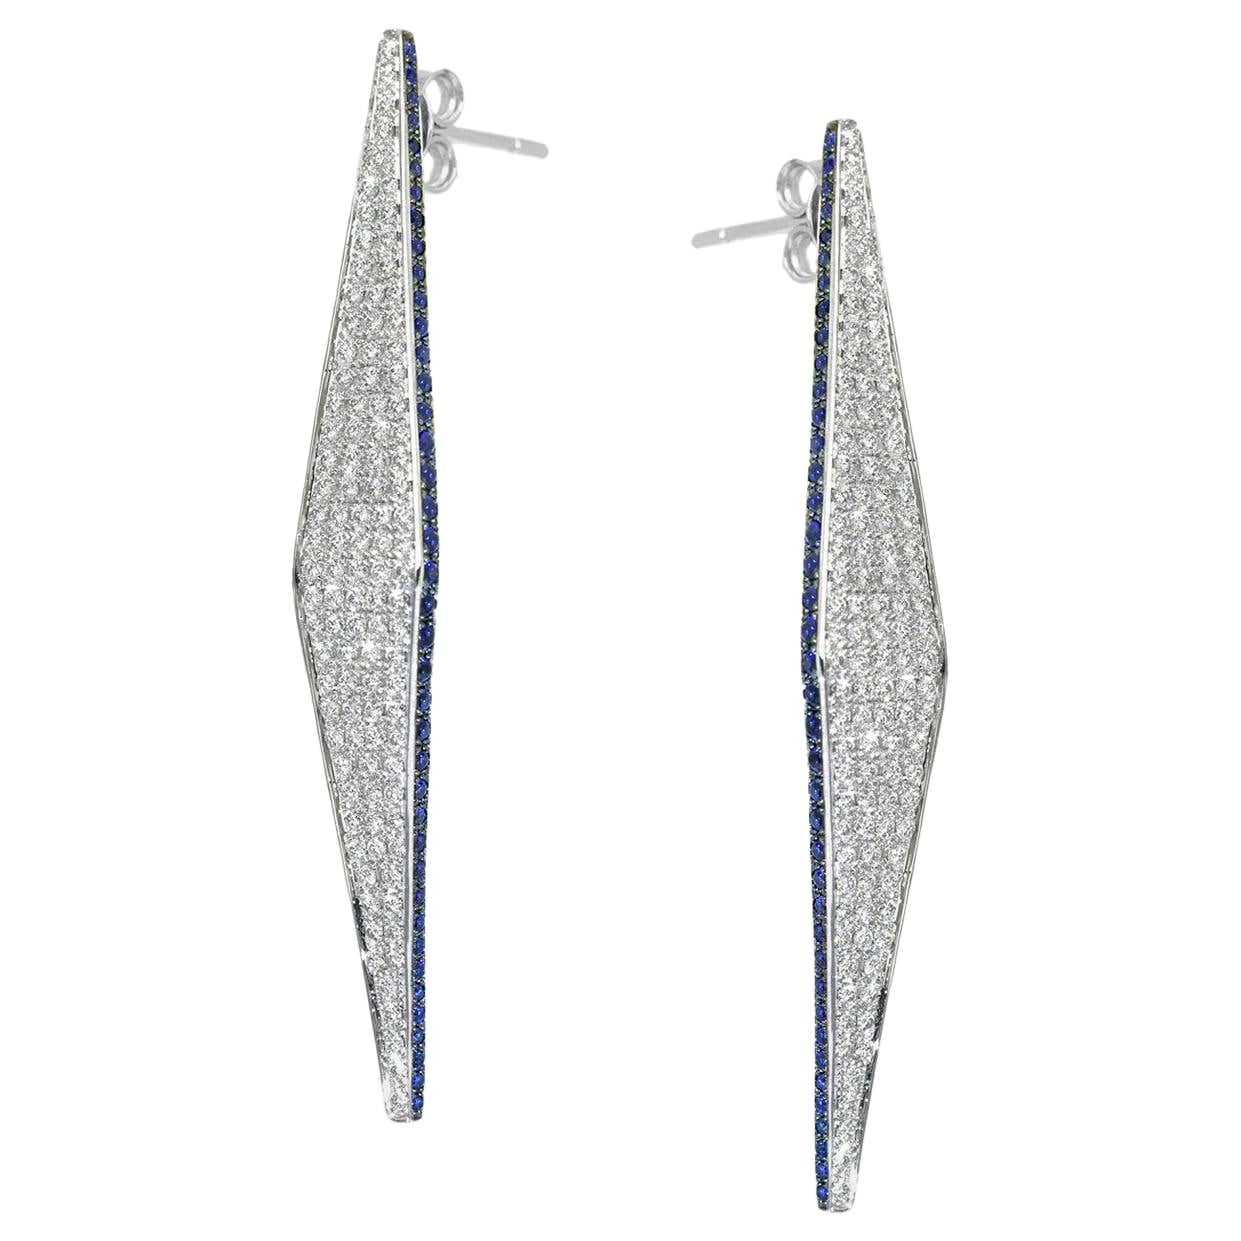 Contemporary Ralph Masri Modernist Pave Diamond and Sapphire Earrings For Sale